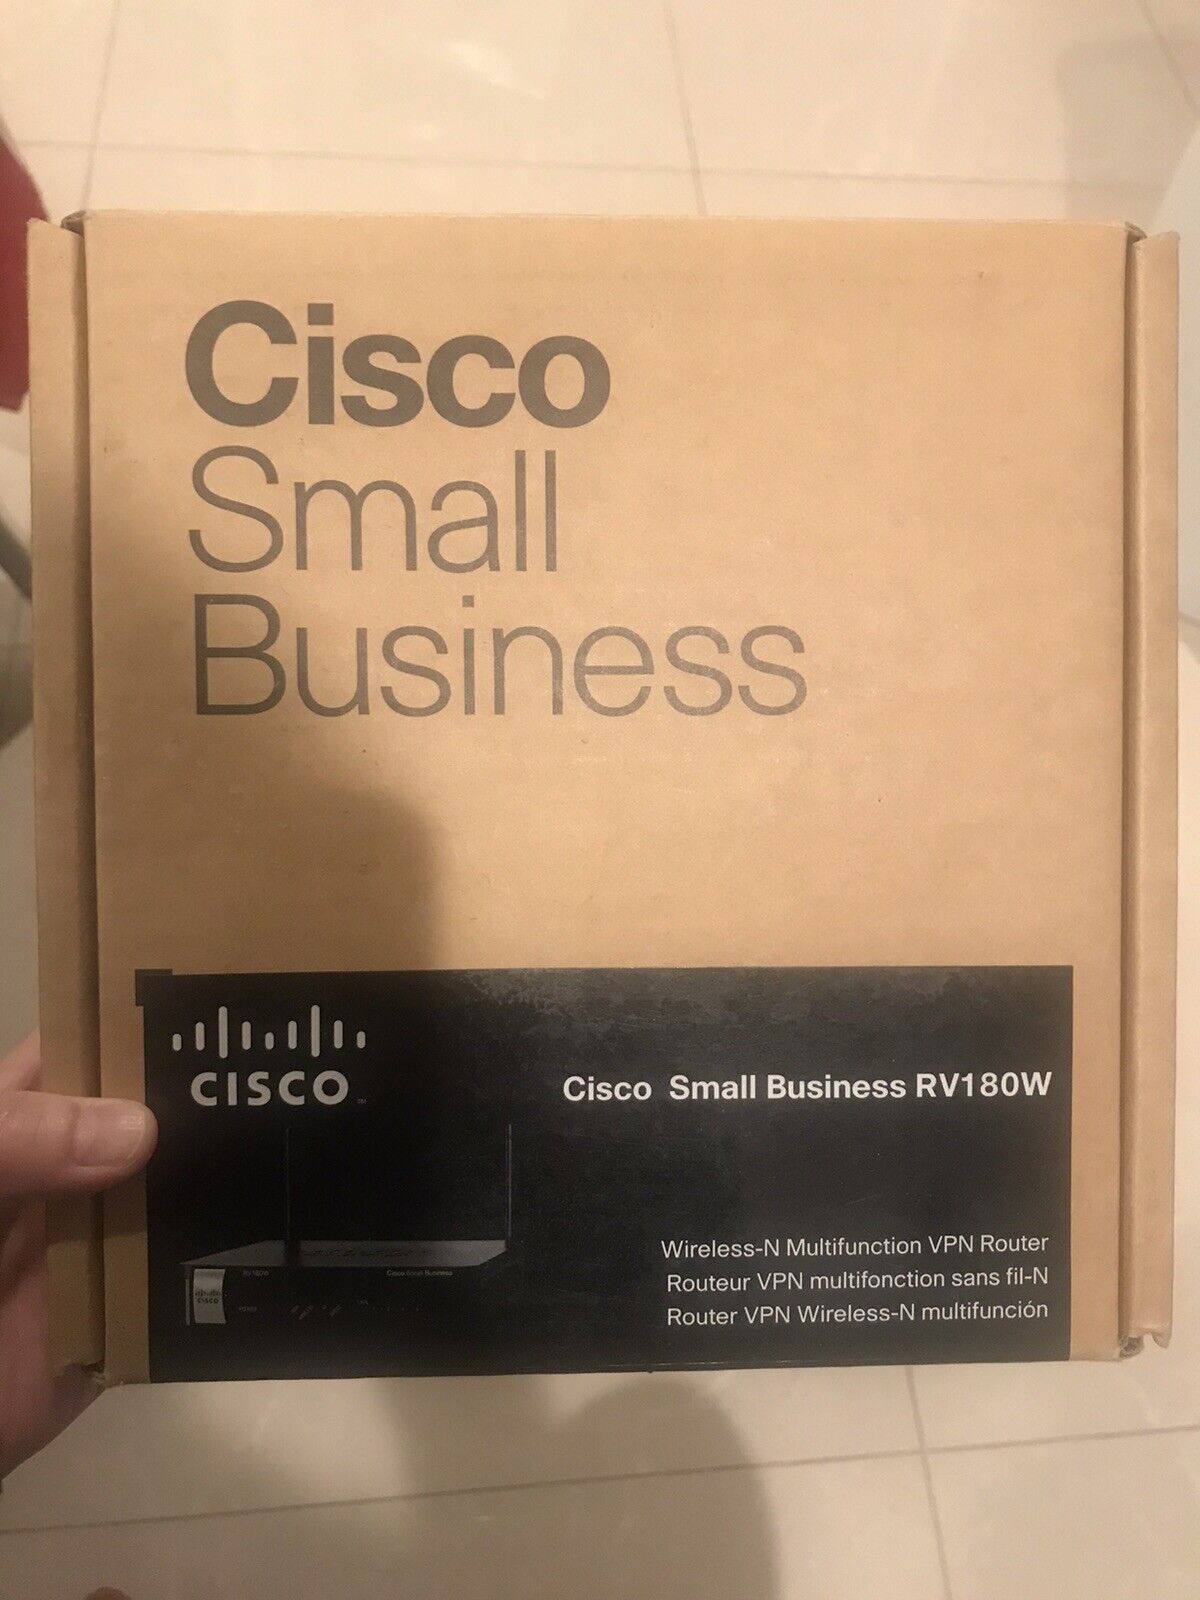 Brand new Cisco Wireless-N Multifunction VPN Router Small Business RV180W